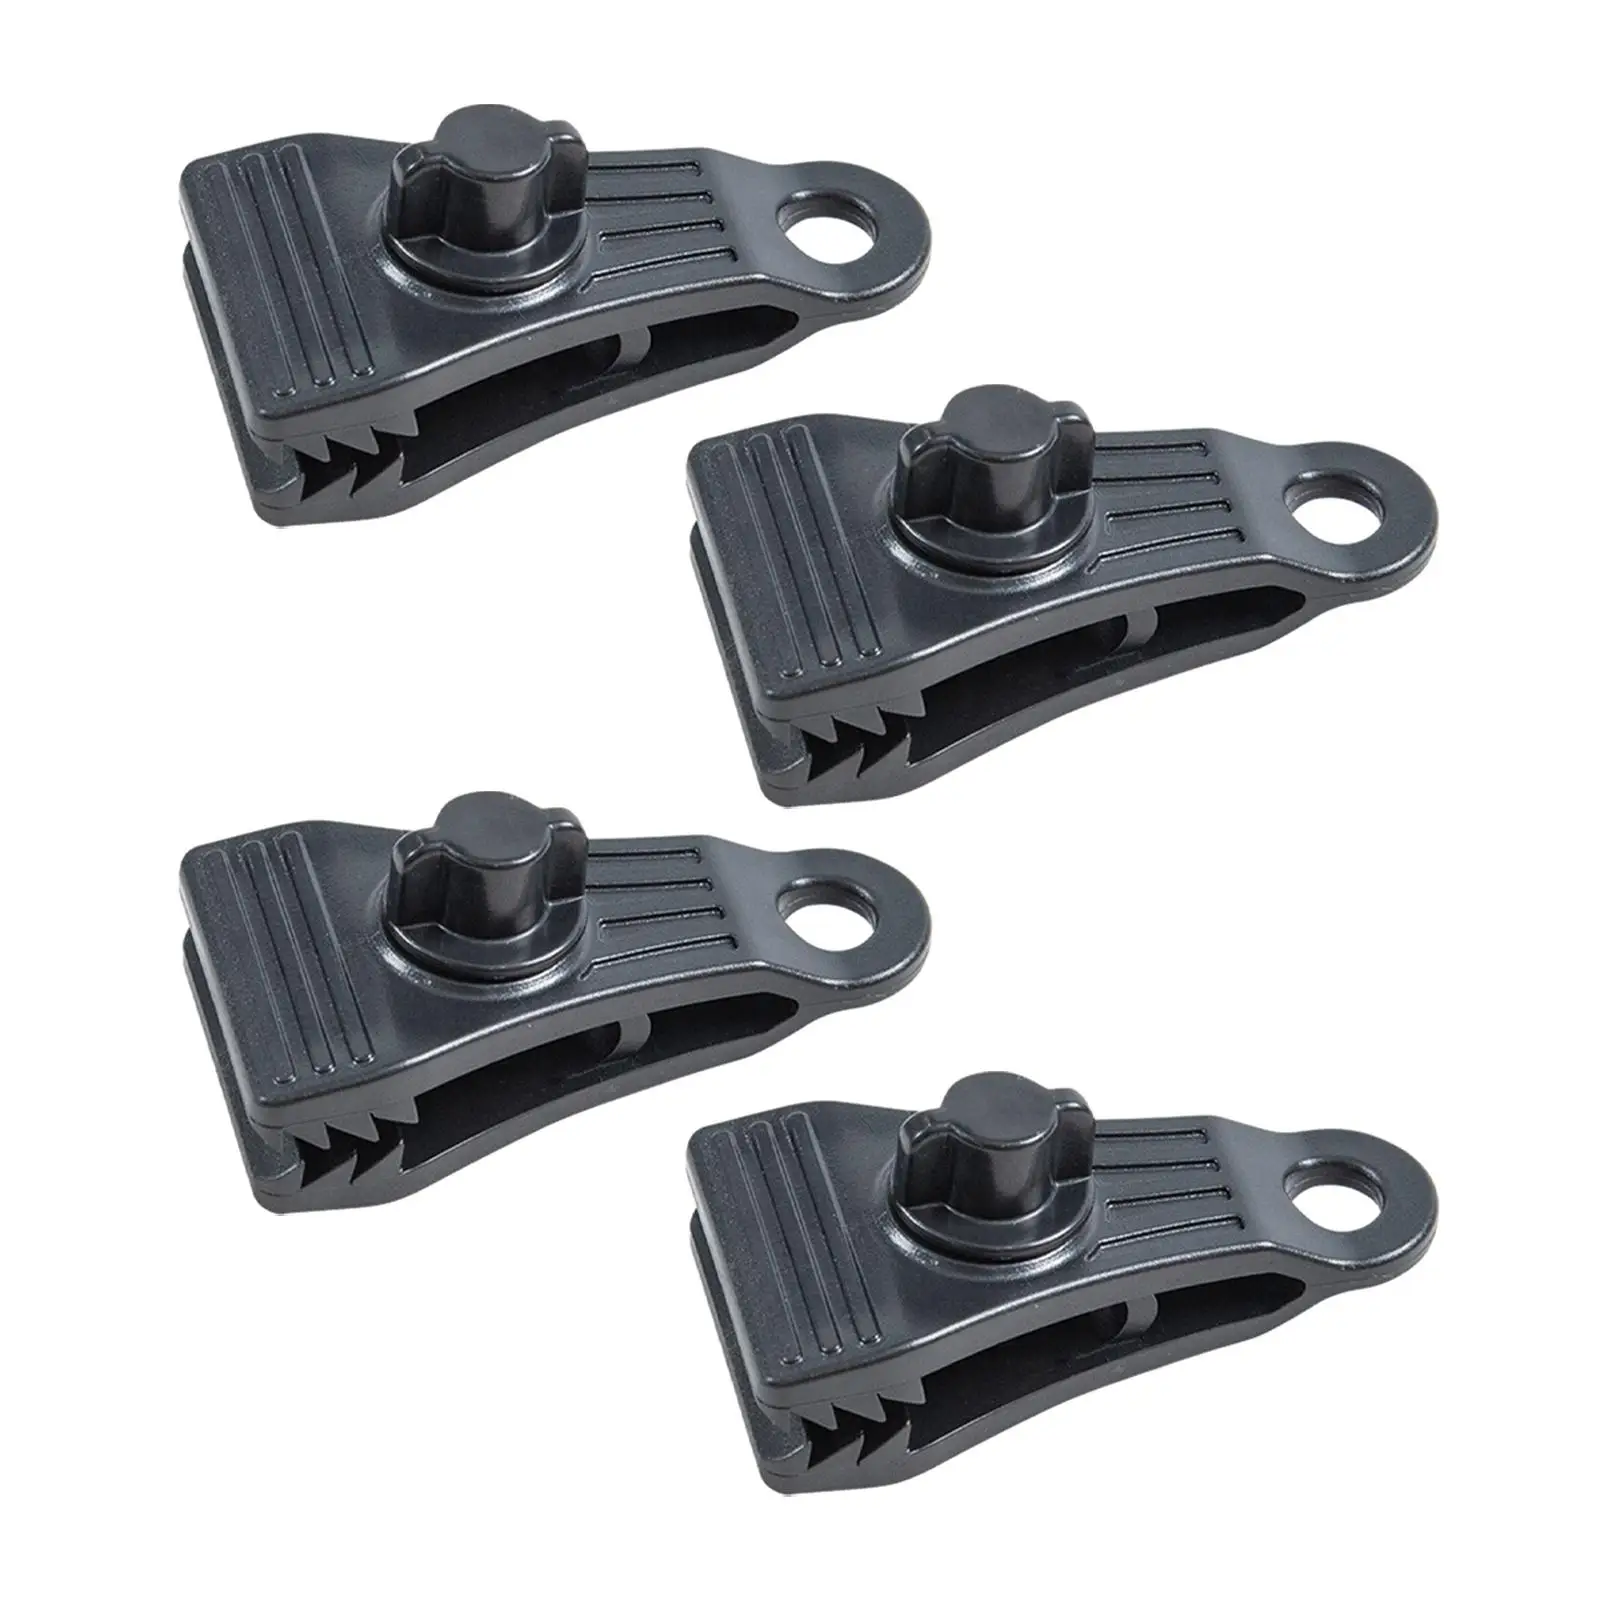 4Pcs Heavy Duty Tarp Clips Canopies Clamps Awning Fixed Clip Reusable Tarp Clamps for Boat Covers Outdoor Camping Tents Tarps